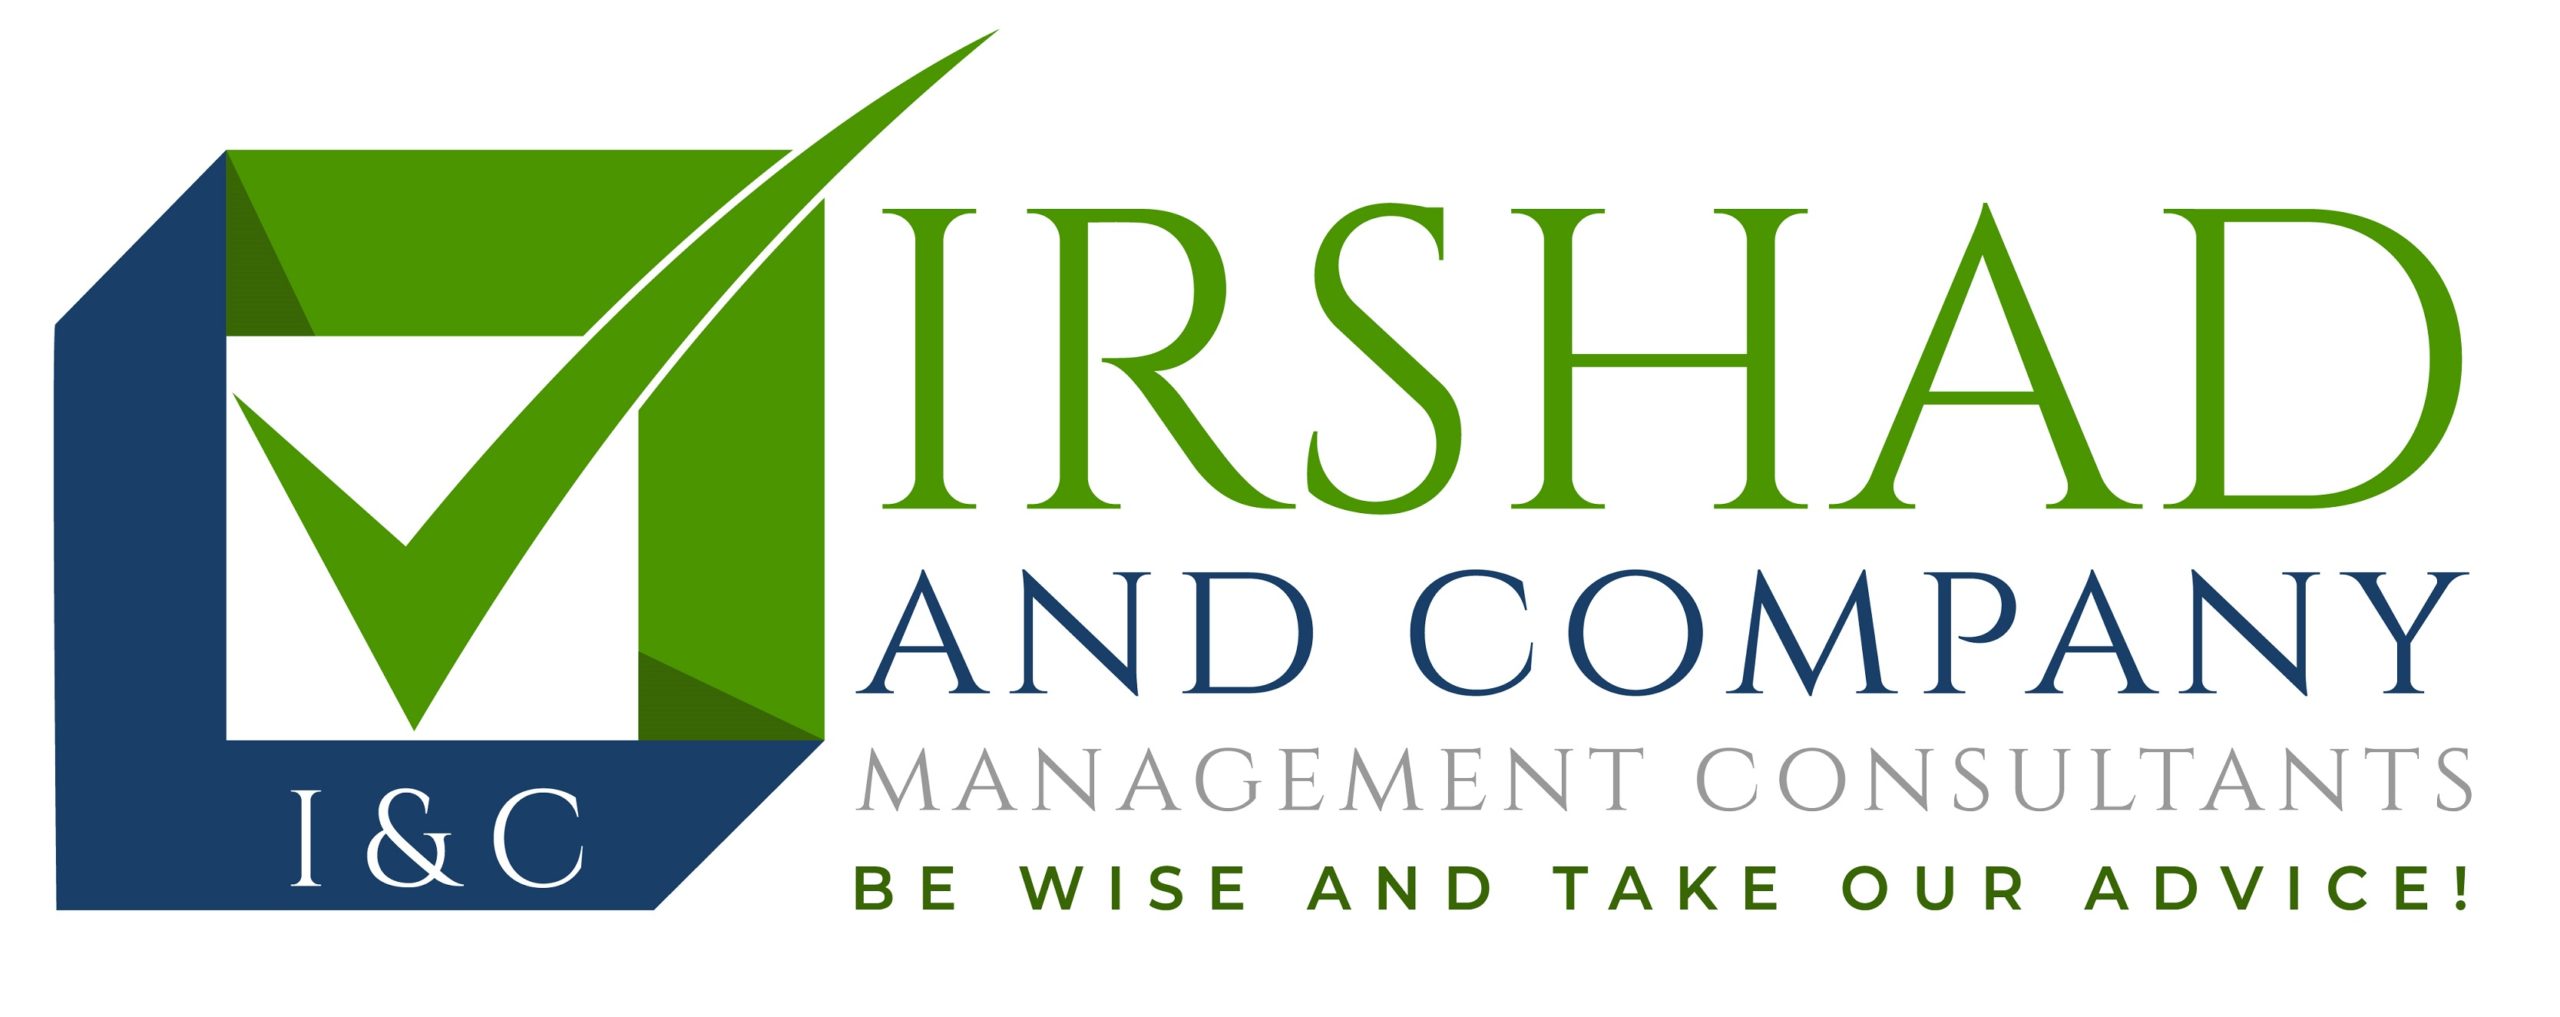 Irshad and Company Management Consultants